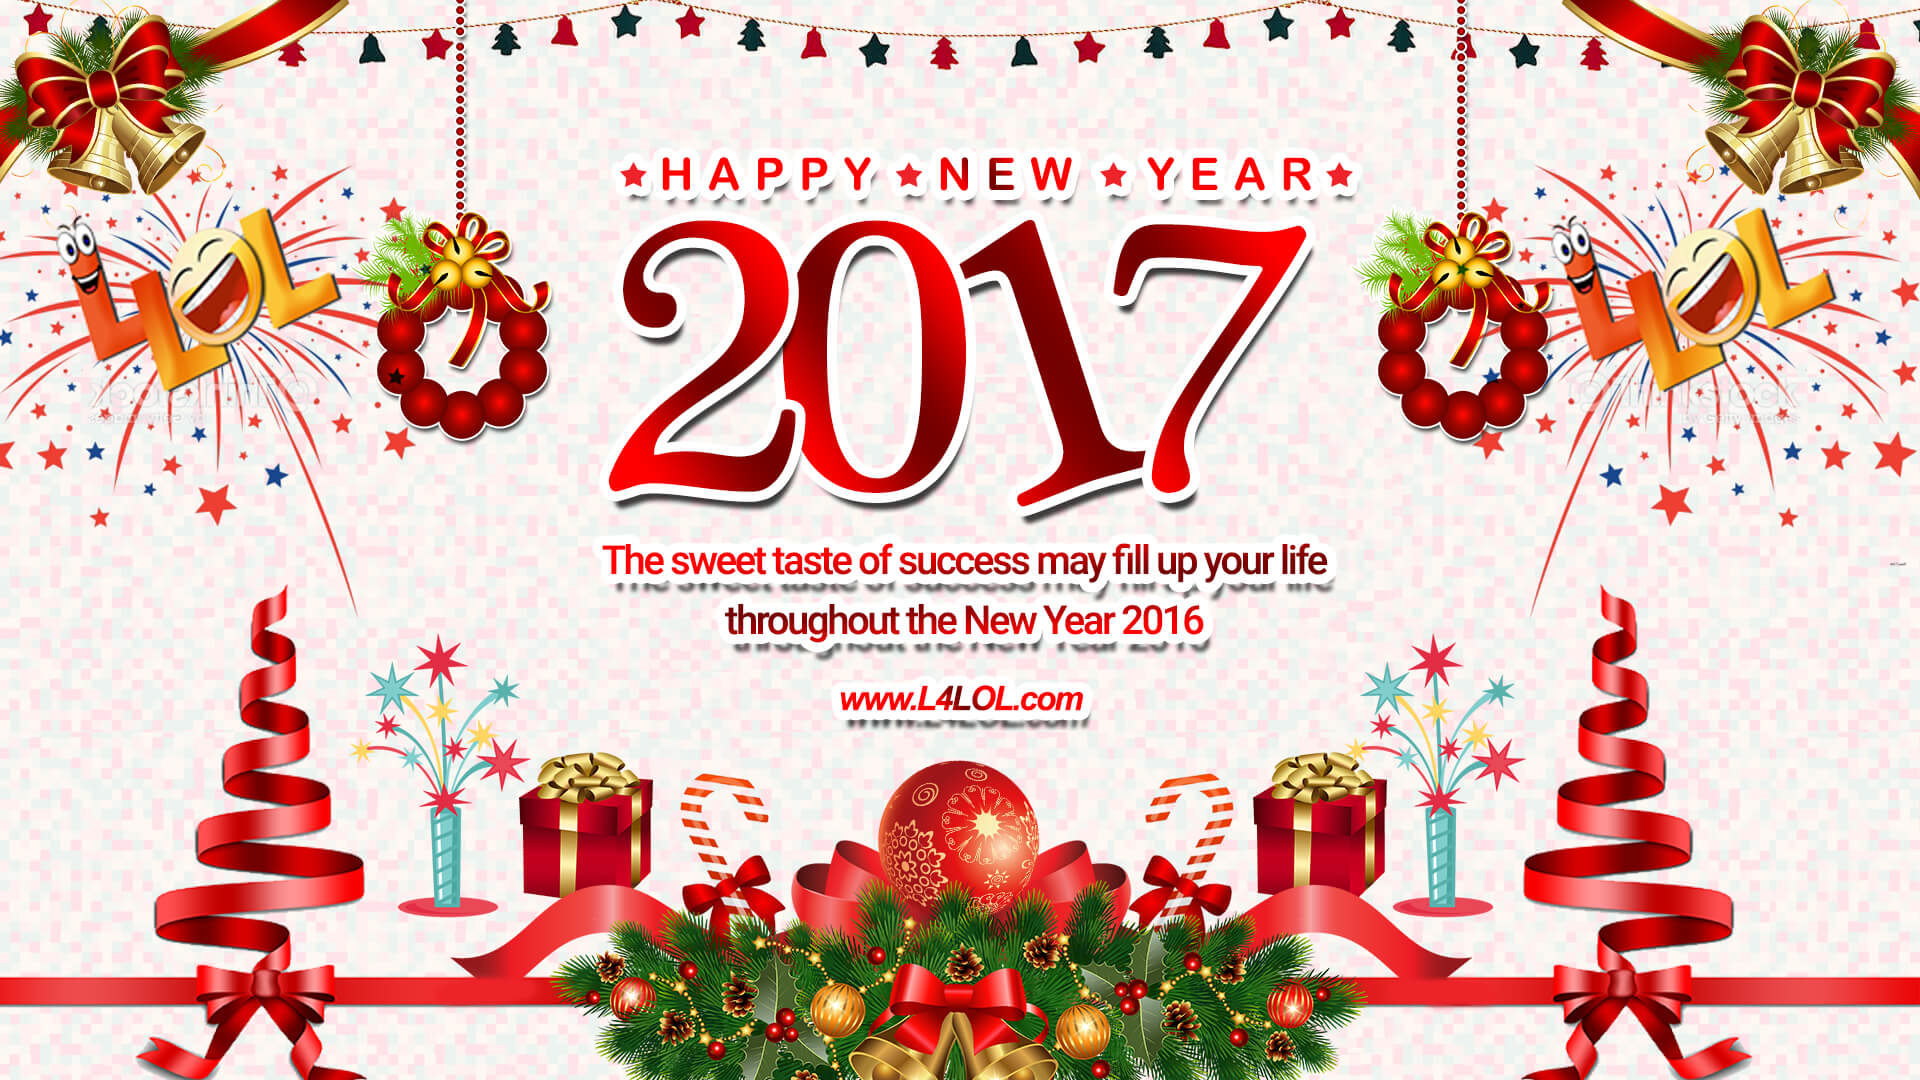 Merry-Christmas-and-Happy-New-Year-2017.jpg